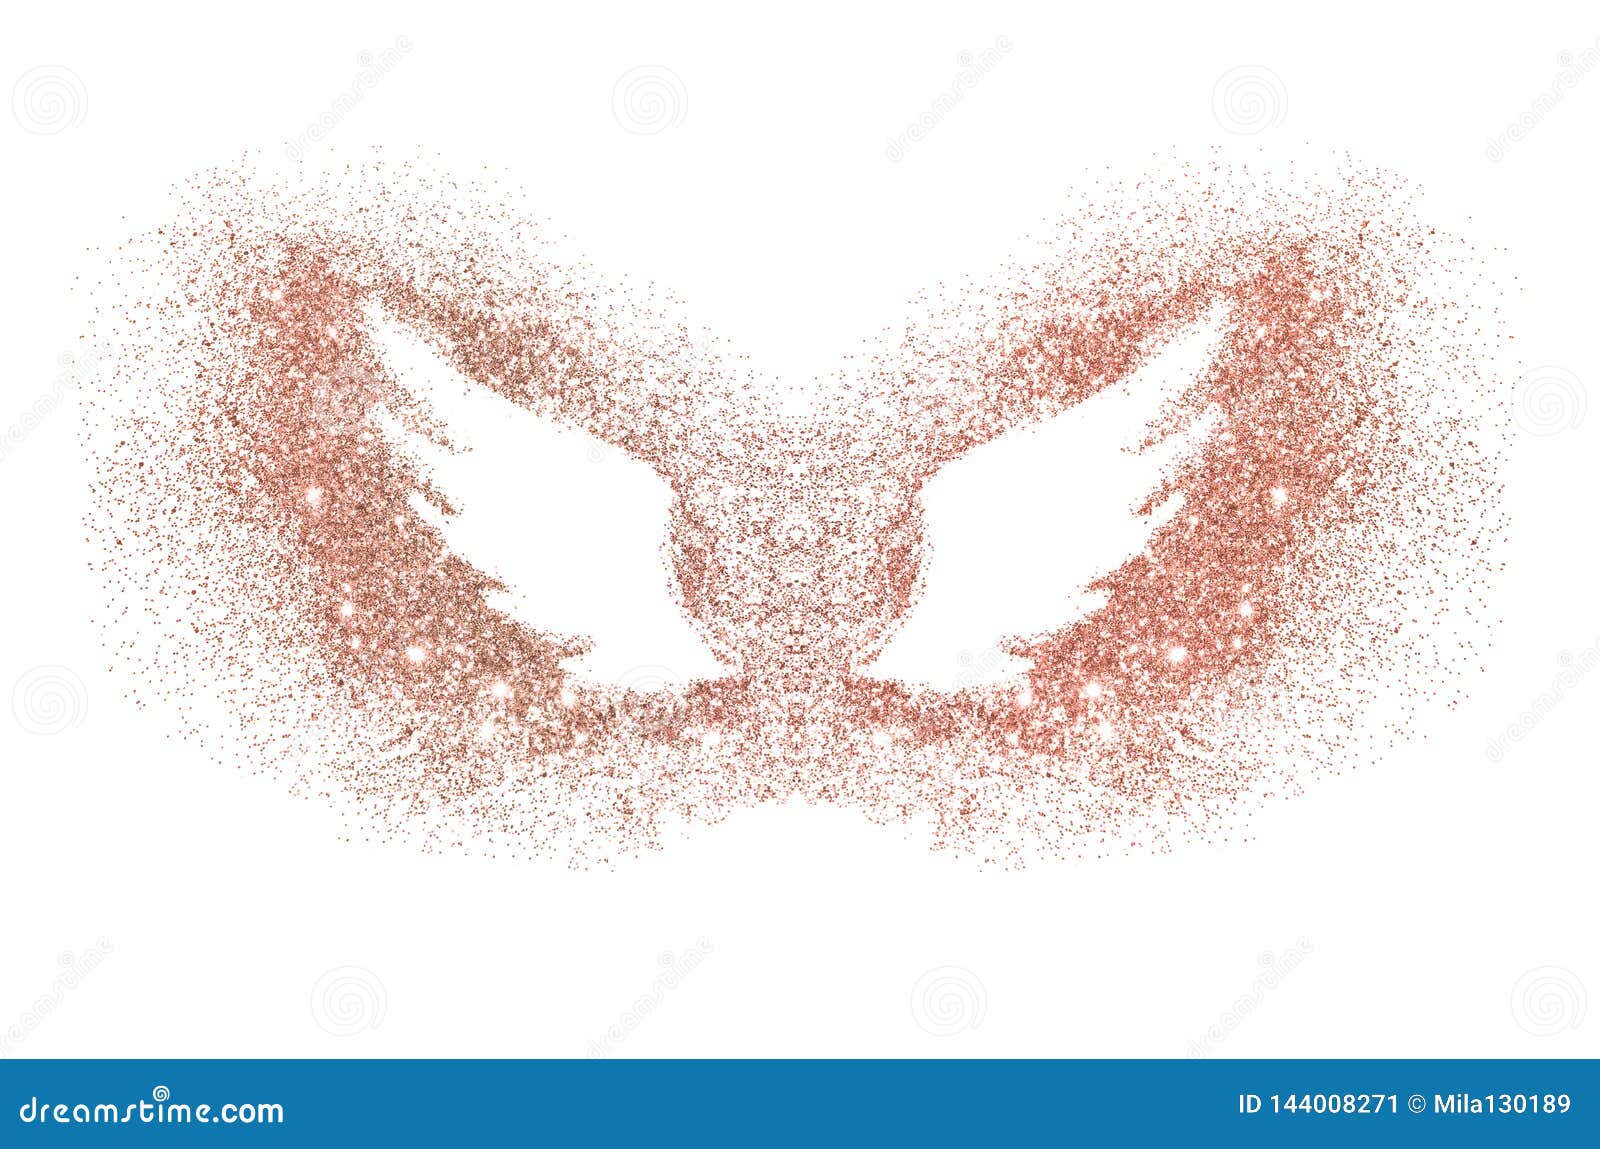 Abstract Wings Of Rose Gold Glitter On White Background